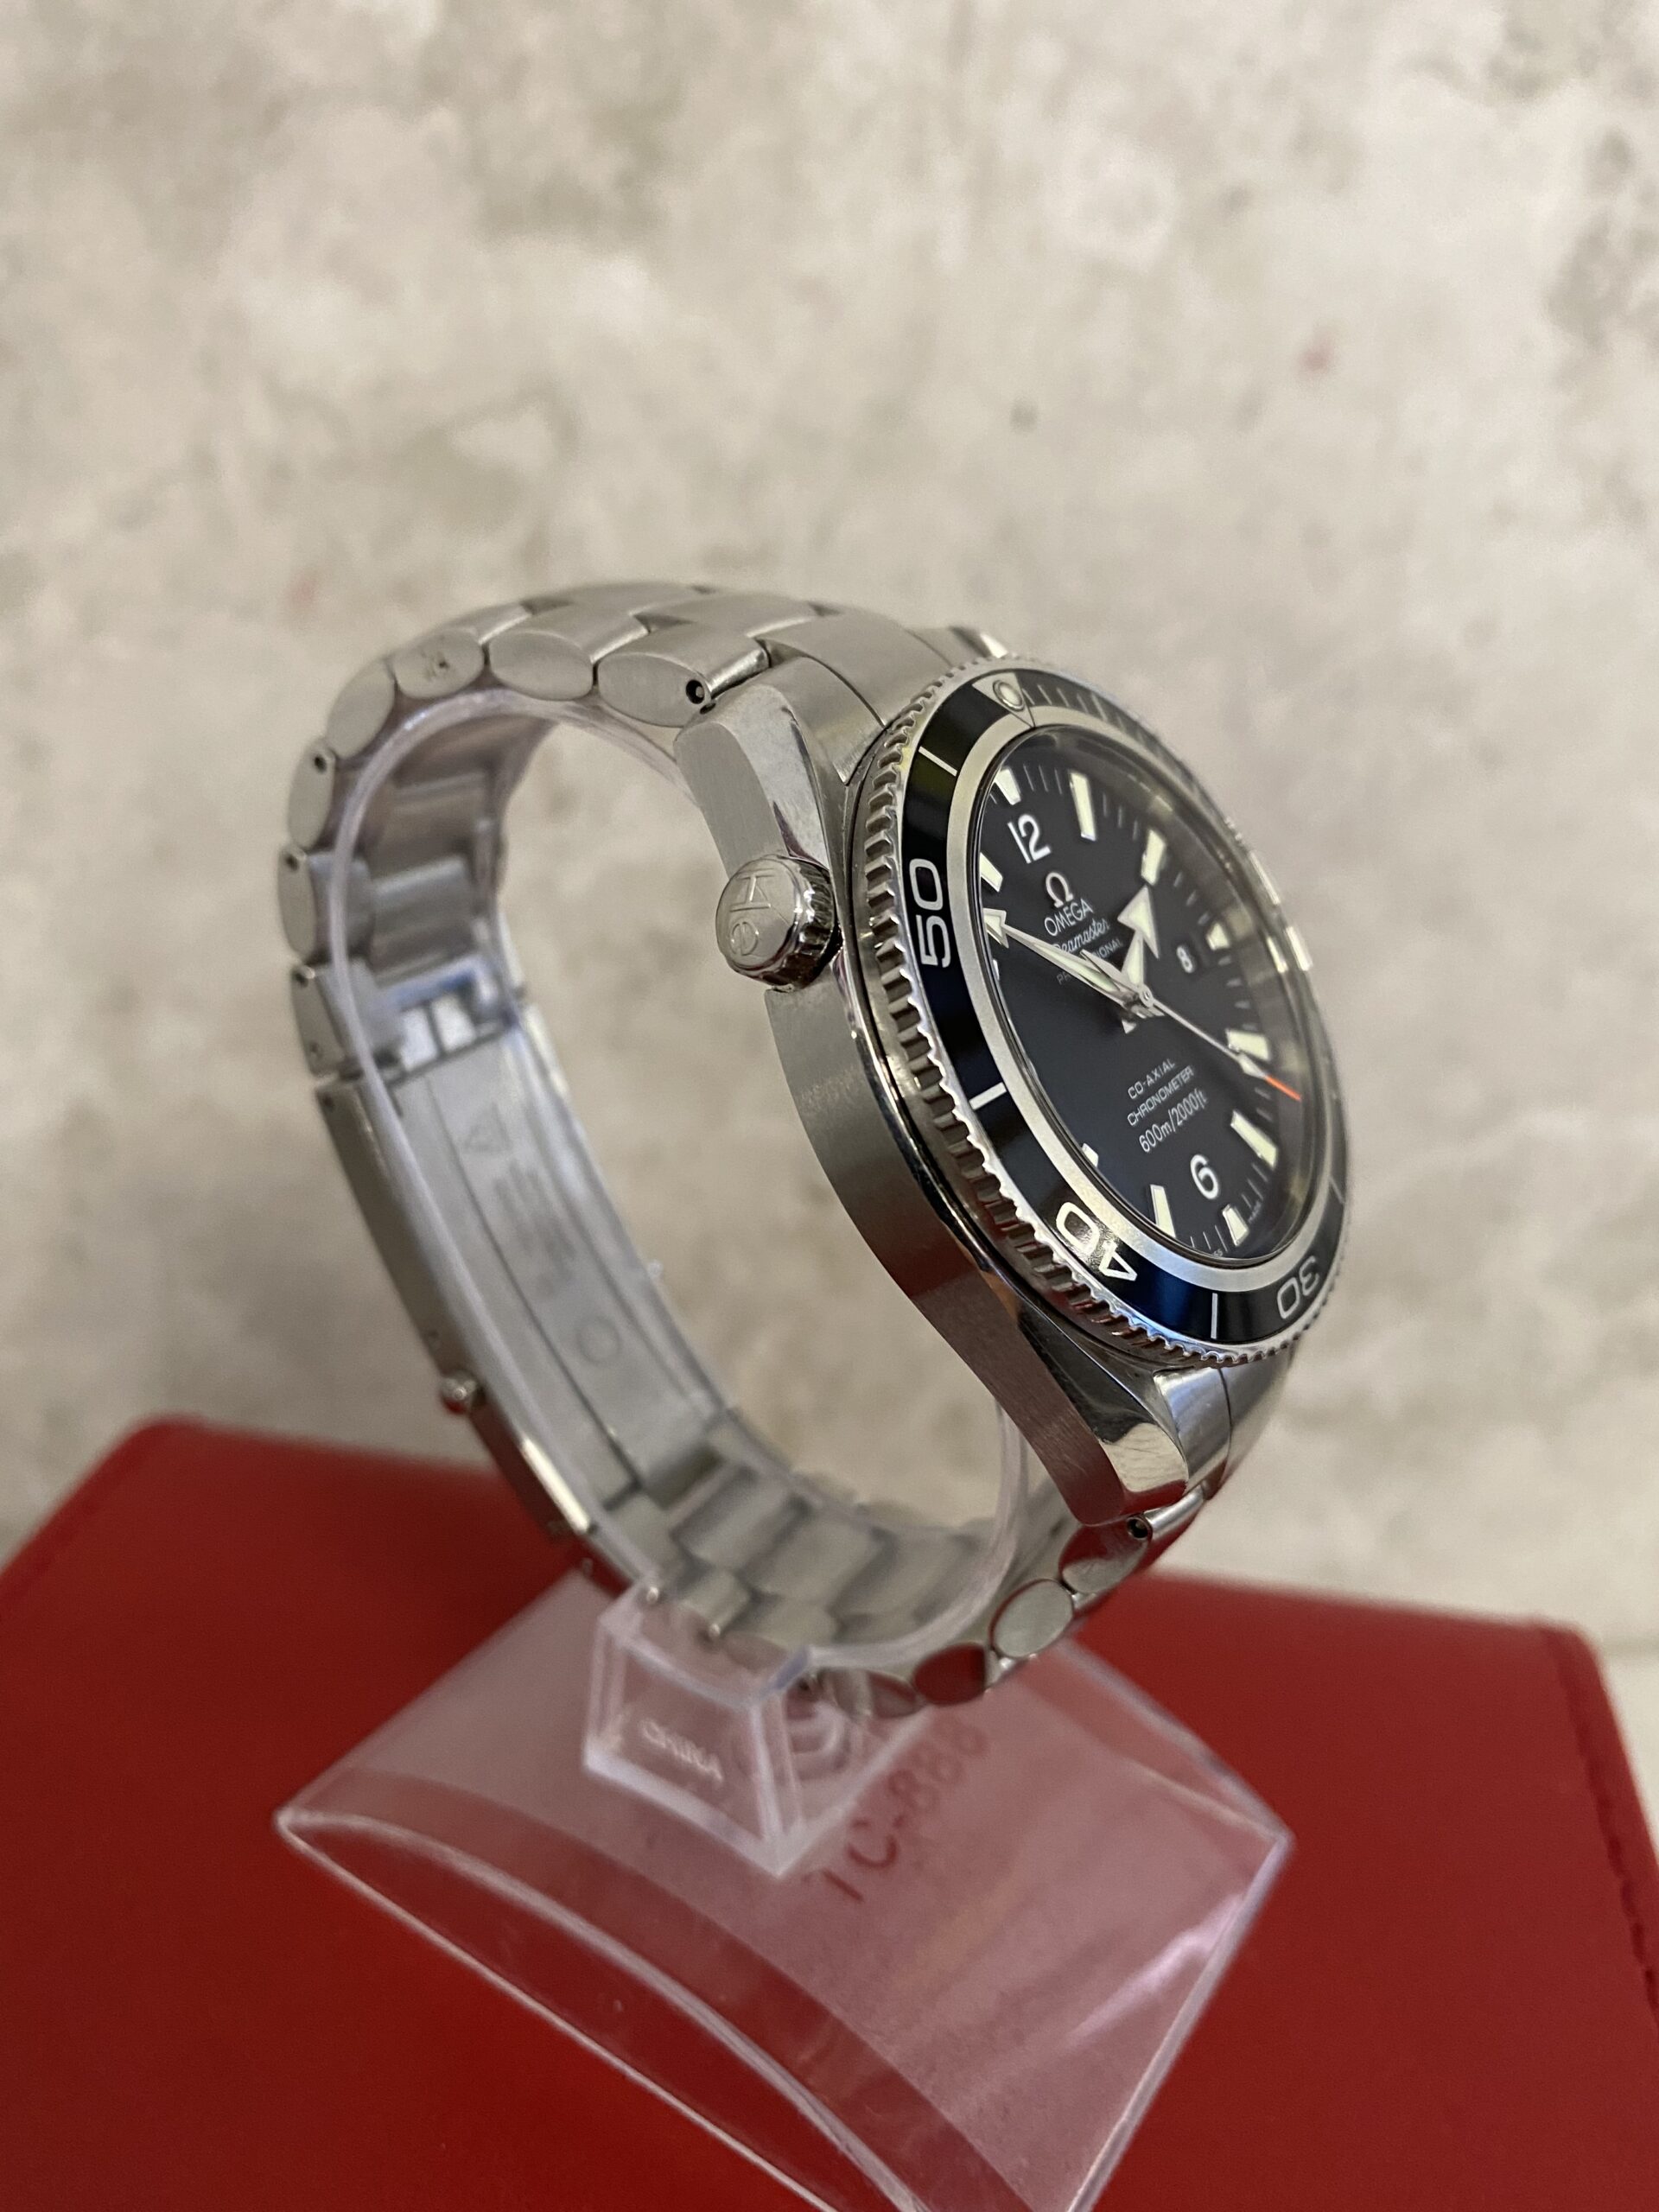 Omega Seamaster Planet Ocean - Ref: 2201500 - Watch Only. Excellent ...